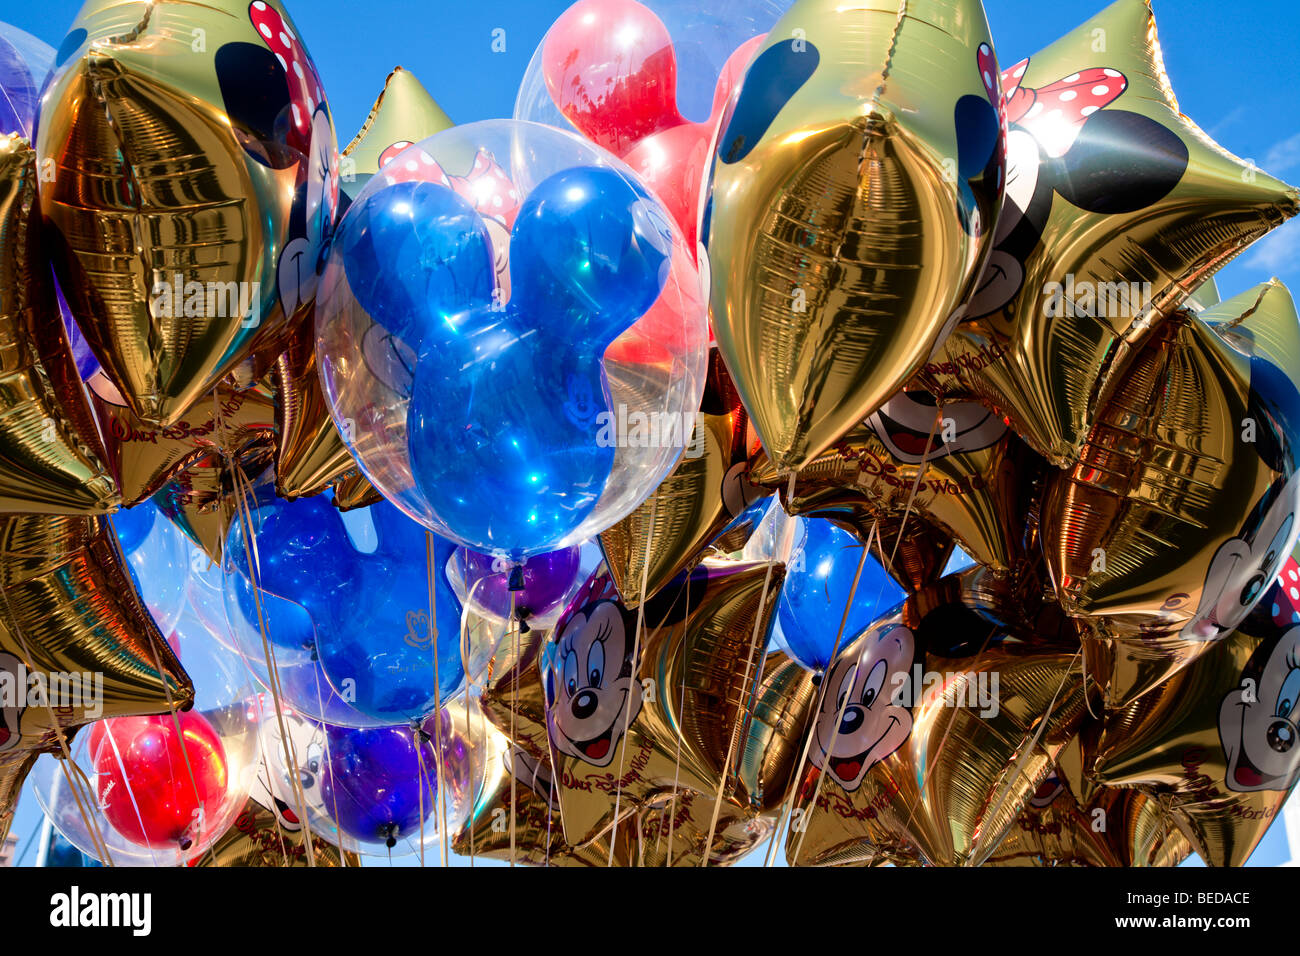 Colorful helium balloons float in the air at Walt Disney World amusement park in Florida, USA Stock Photo